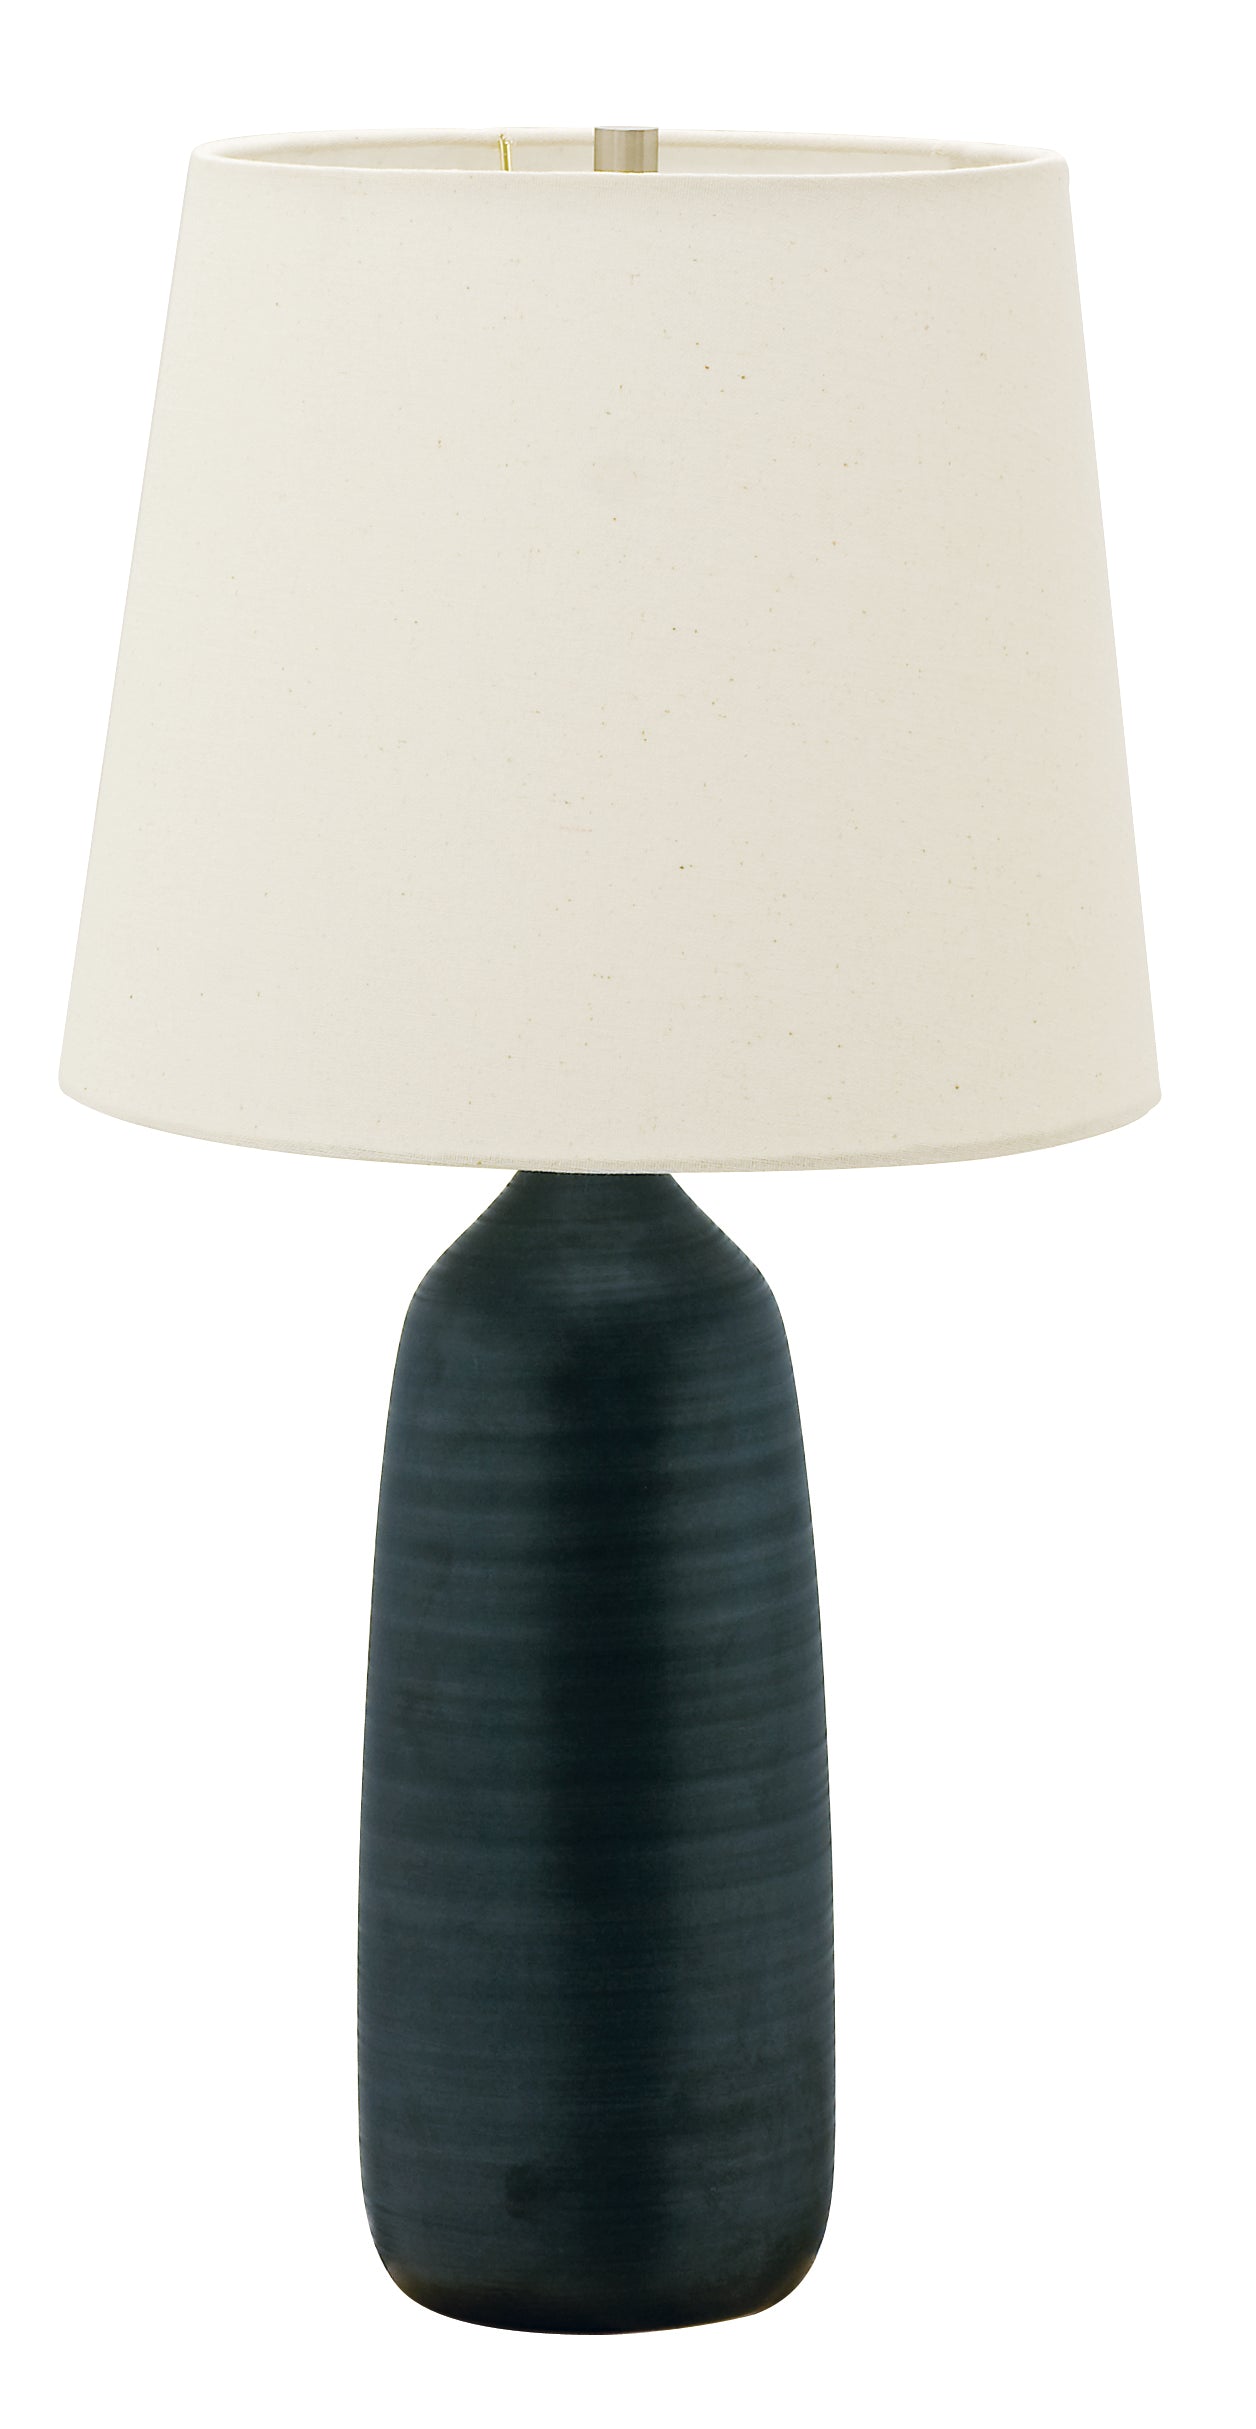 House of Troy Scatchard 31" Stoneware Table Lamp in Black Matte GS101-BM